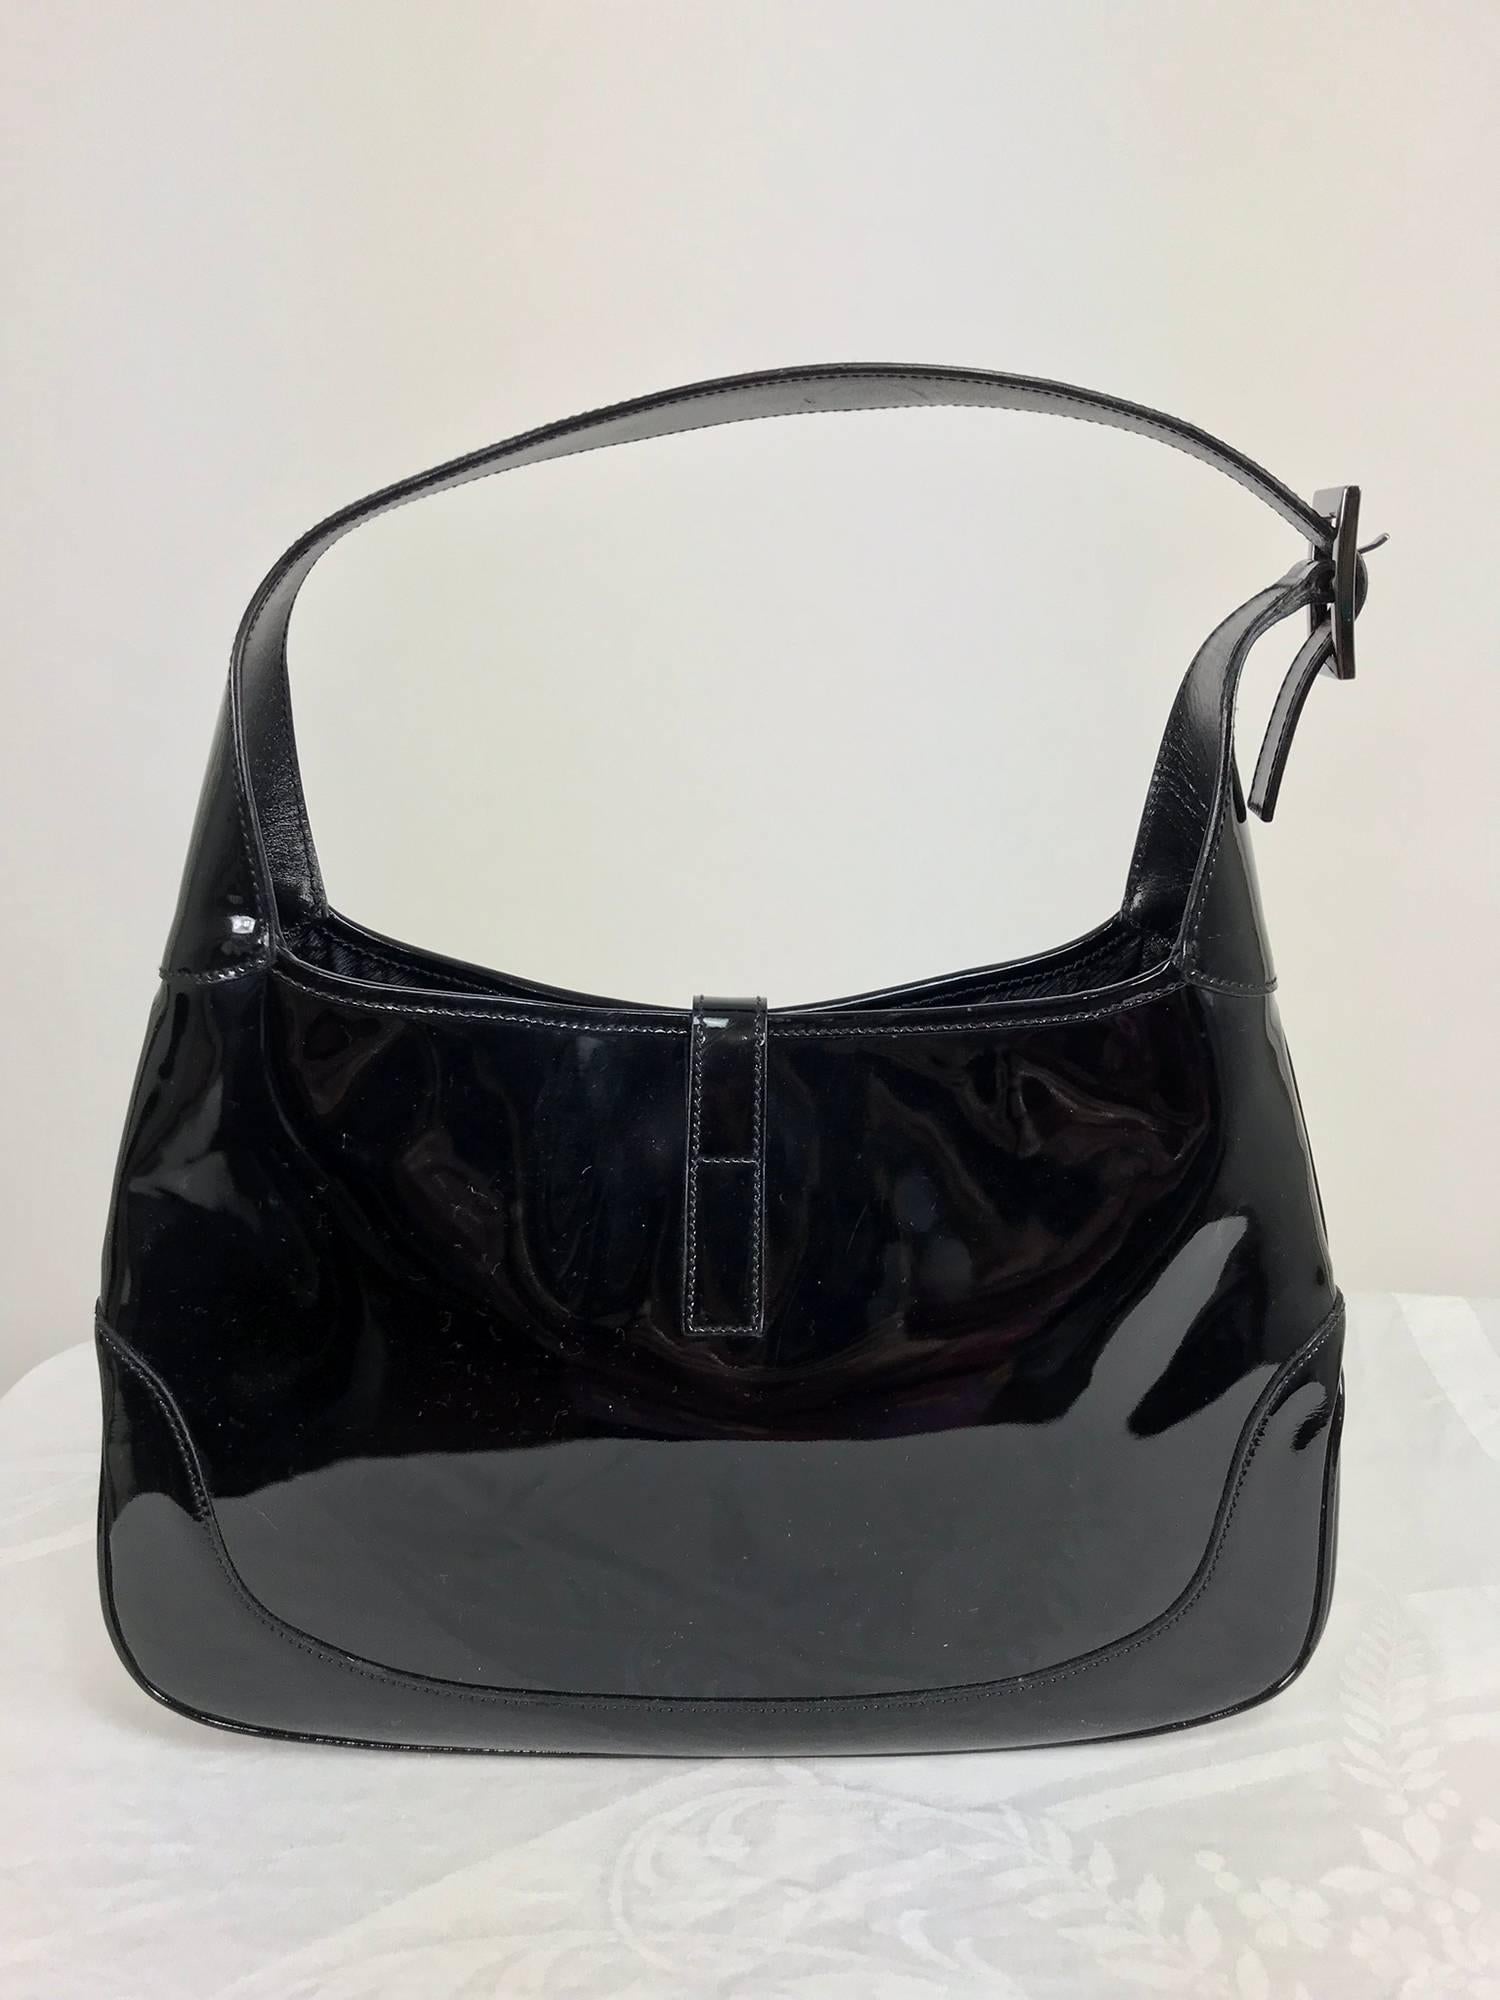 Gucci Jackie O black patent leather handbag...Always stylish this patent leather Gucci bag has silver hardware and is lined black Gucci logo fabric...Shoulder bag...In excellent condition with light wear...
Measurements are in inches:
13 wide at